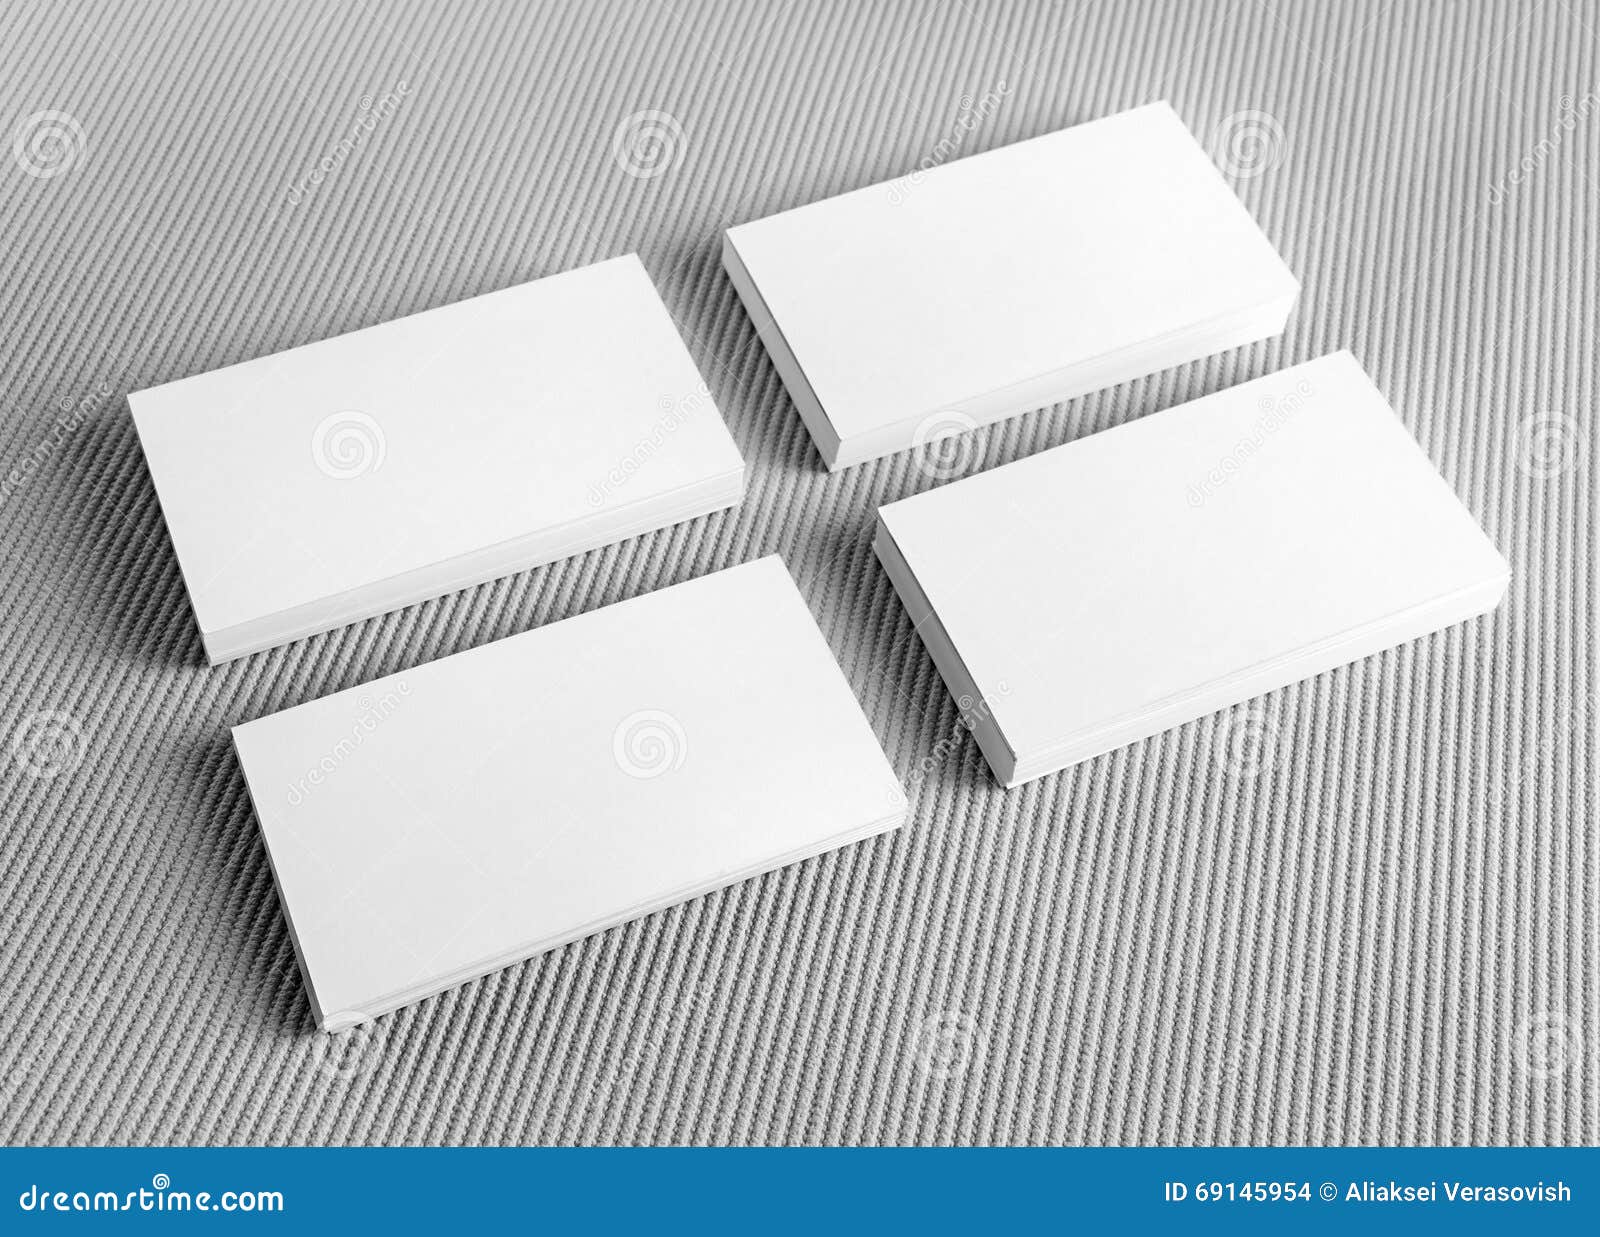 blank white business cards 1